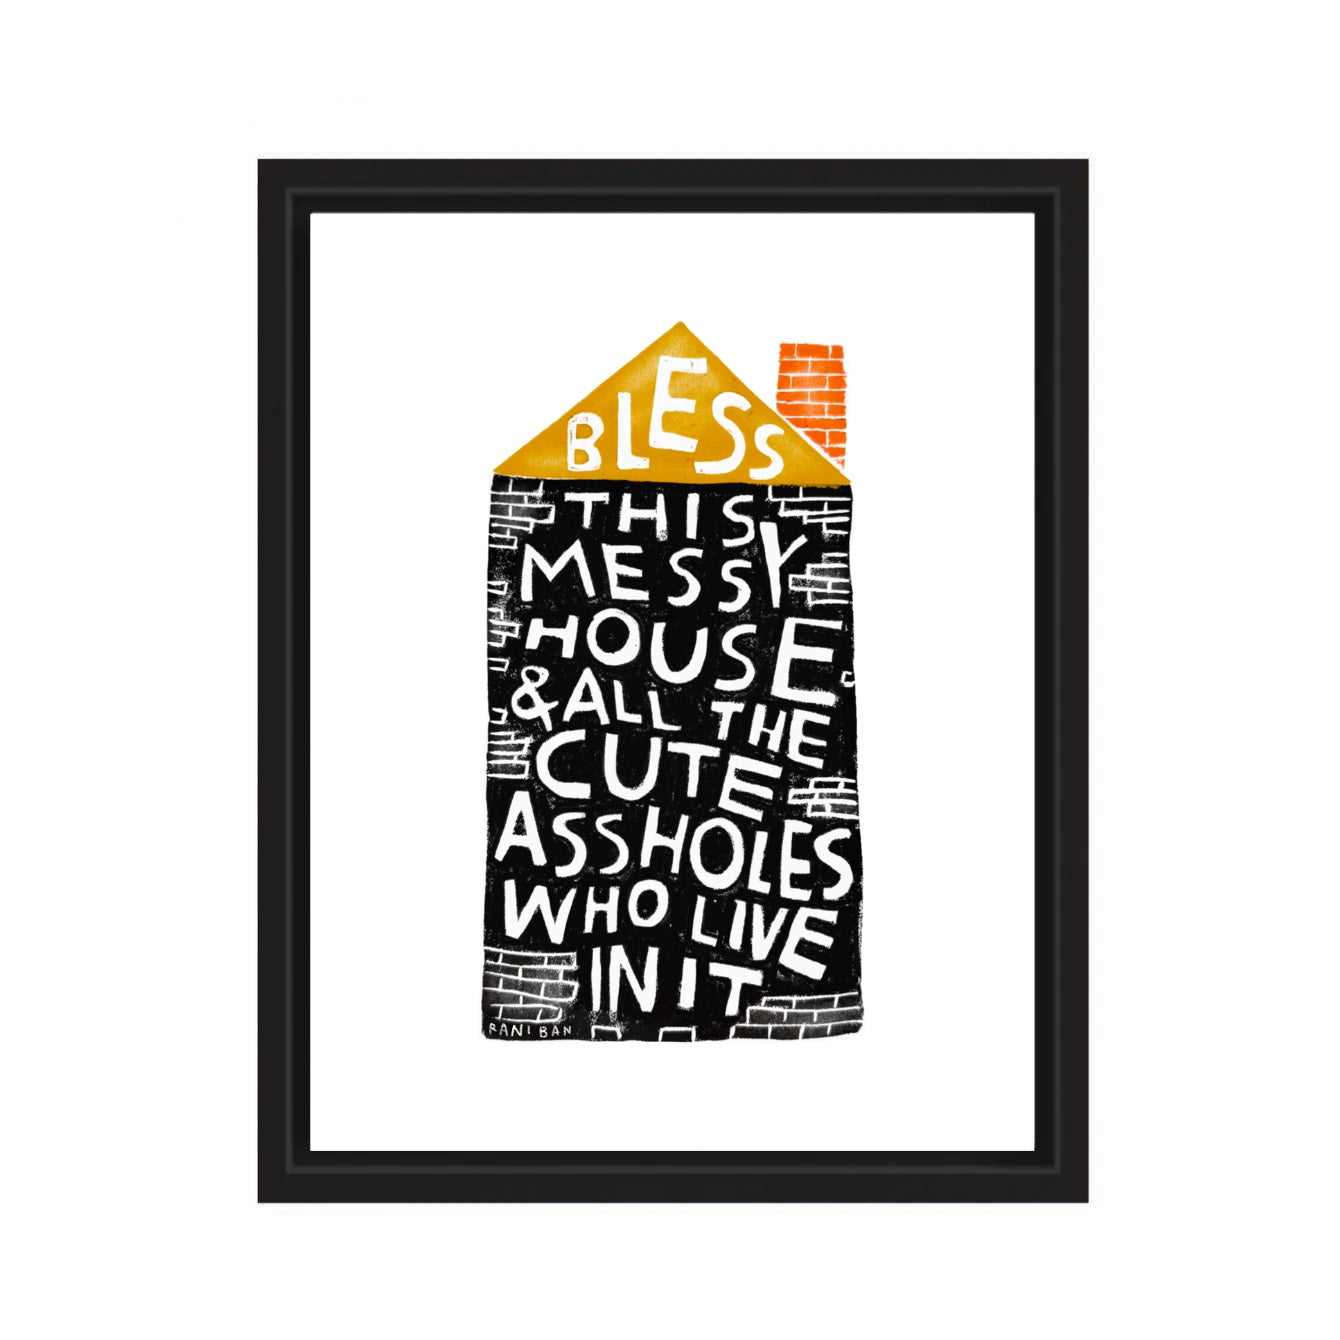 BLESS THIS MESSY HOUSE Art Print